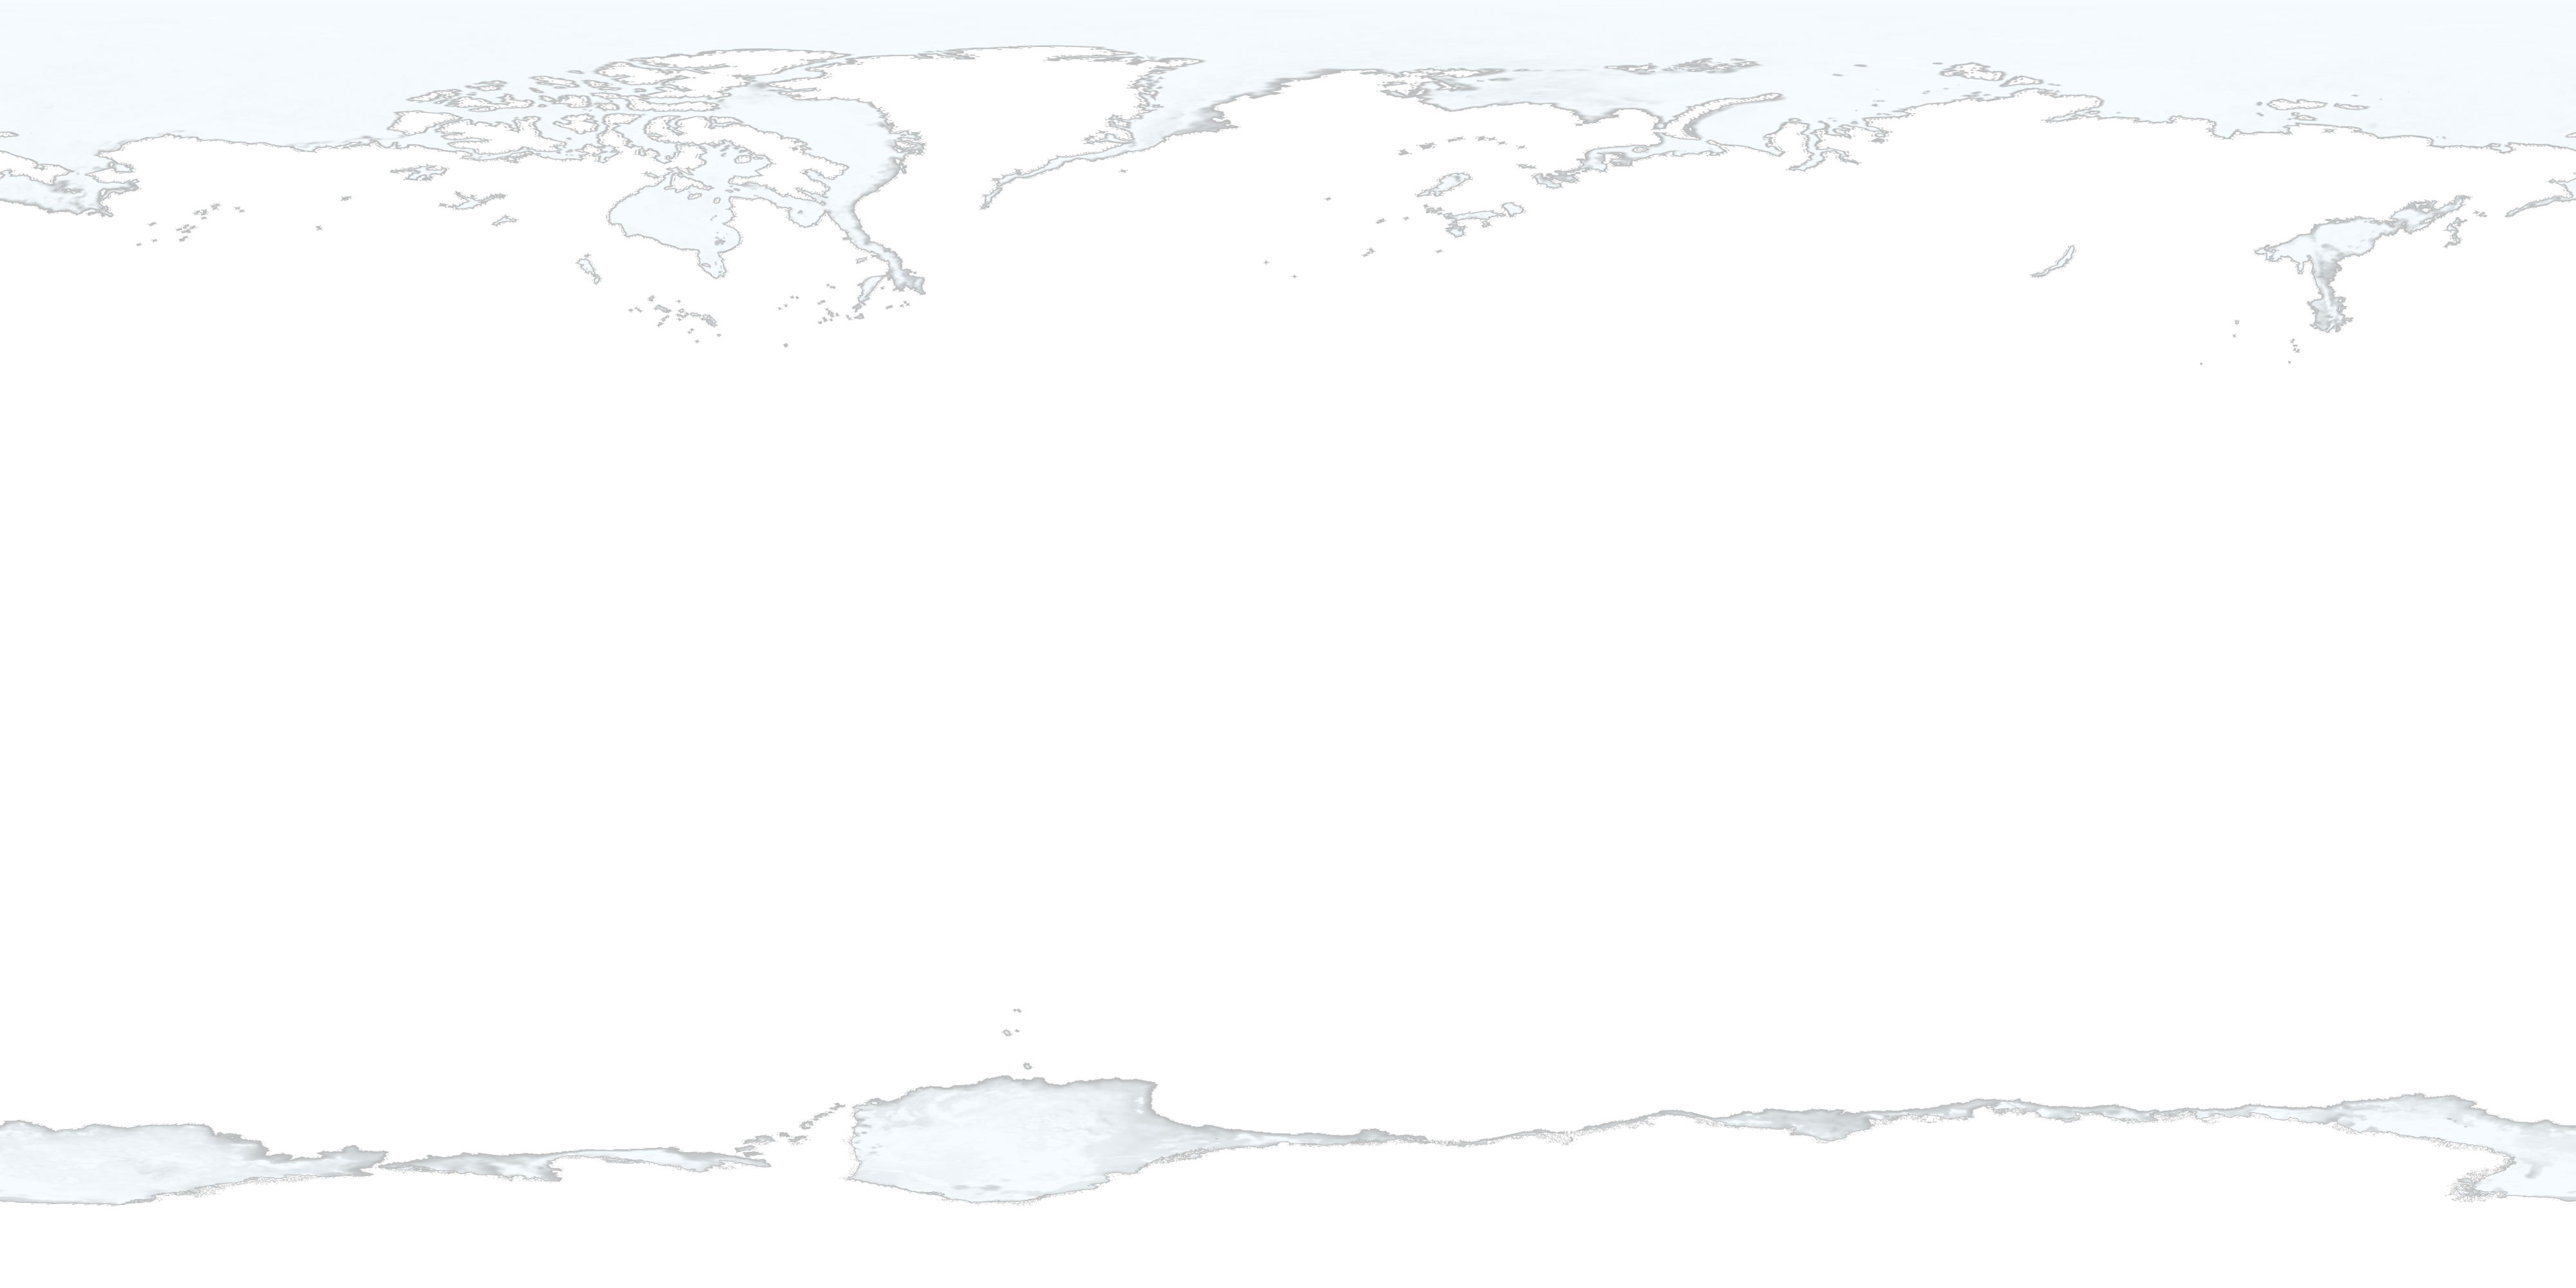 Daily sea ice from 6/21/2002 through 9/22/2008 shown at a rate of 1 frame per day with a transparent background.